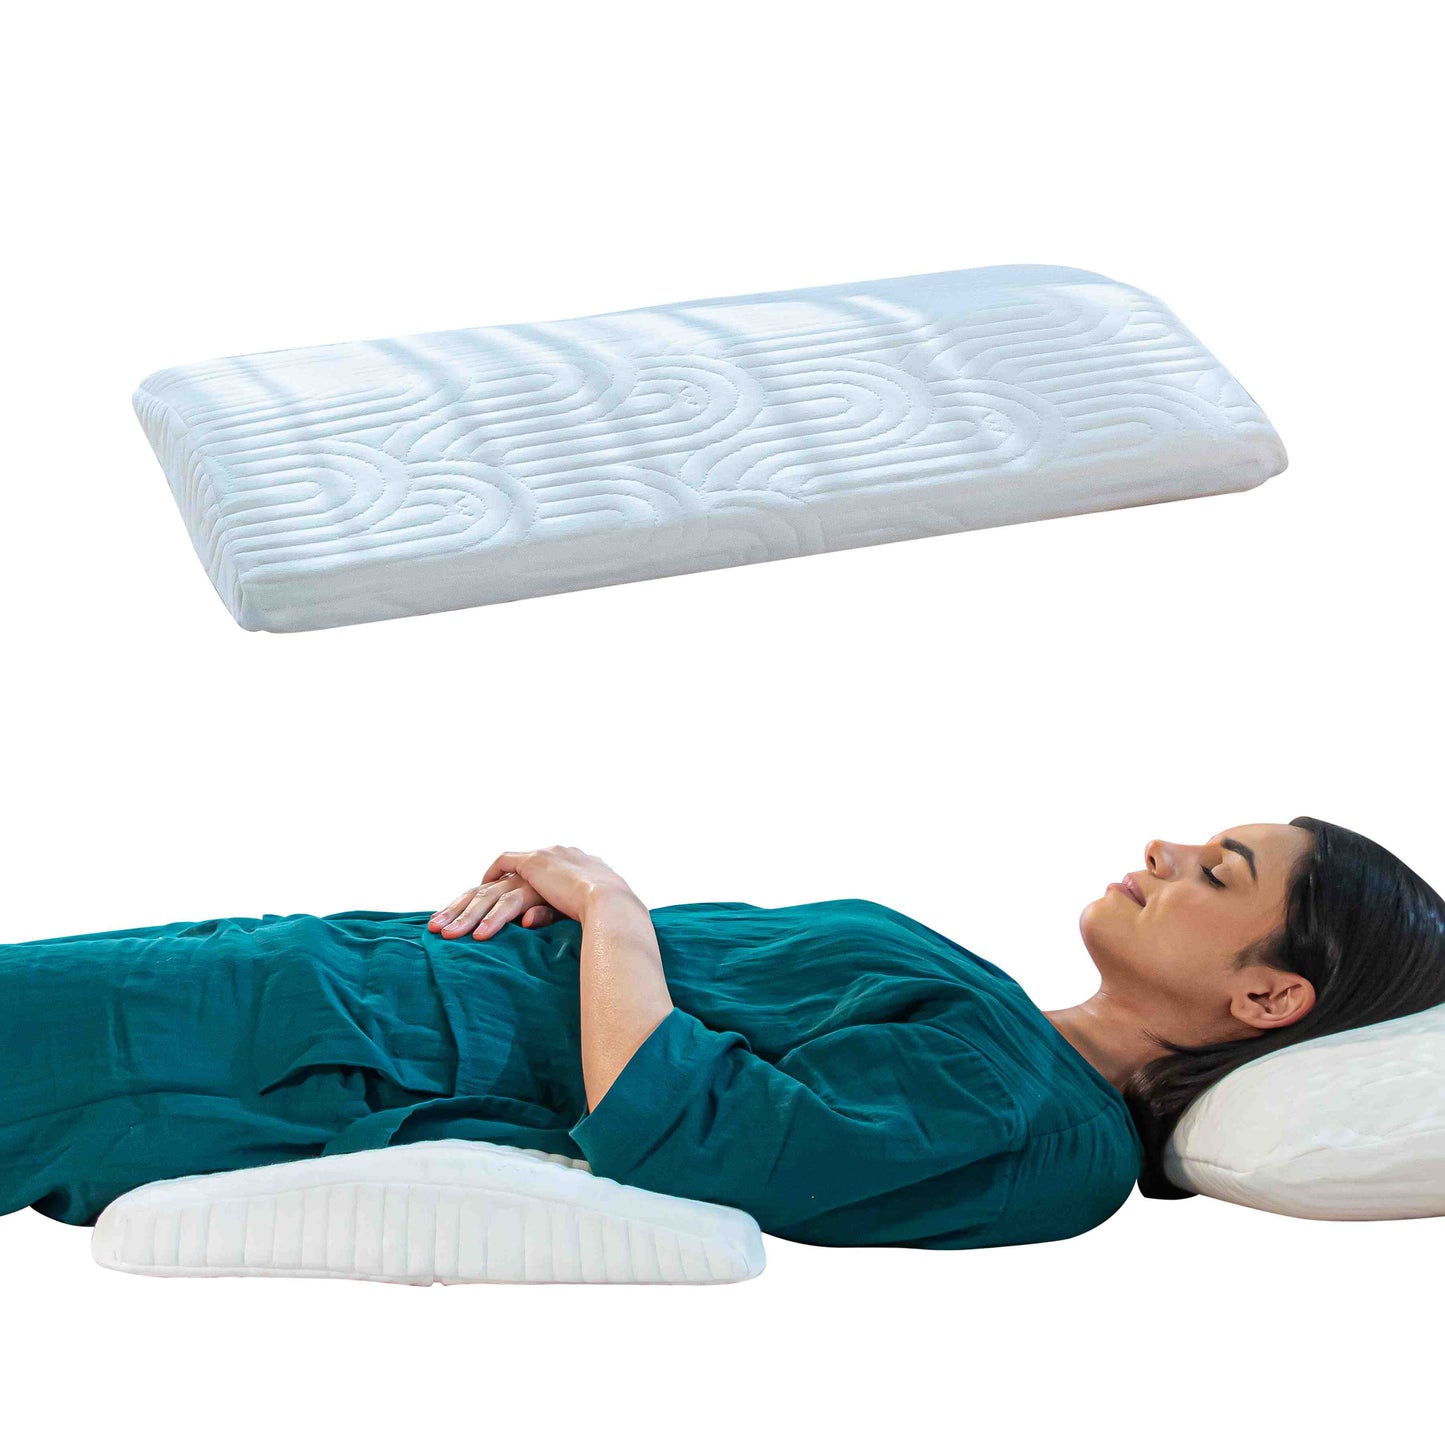 SpineAlign Support Pillow